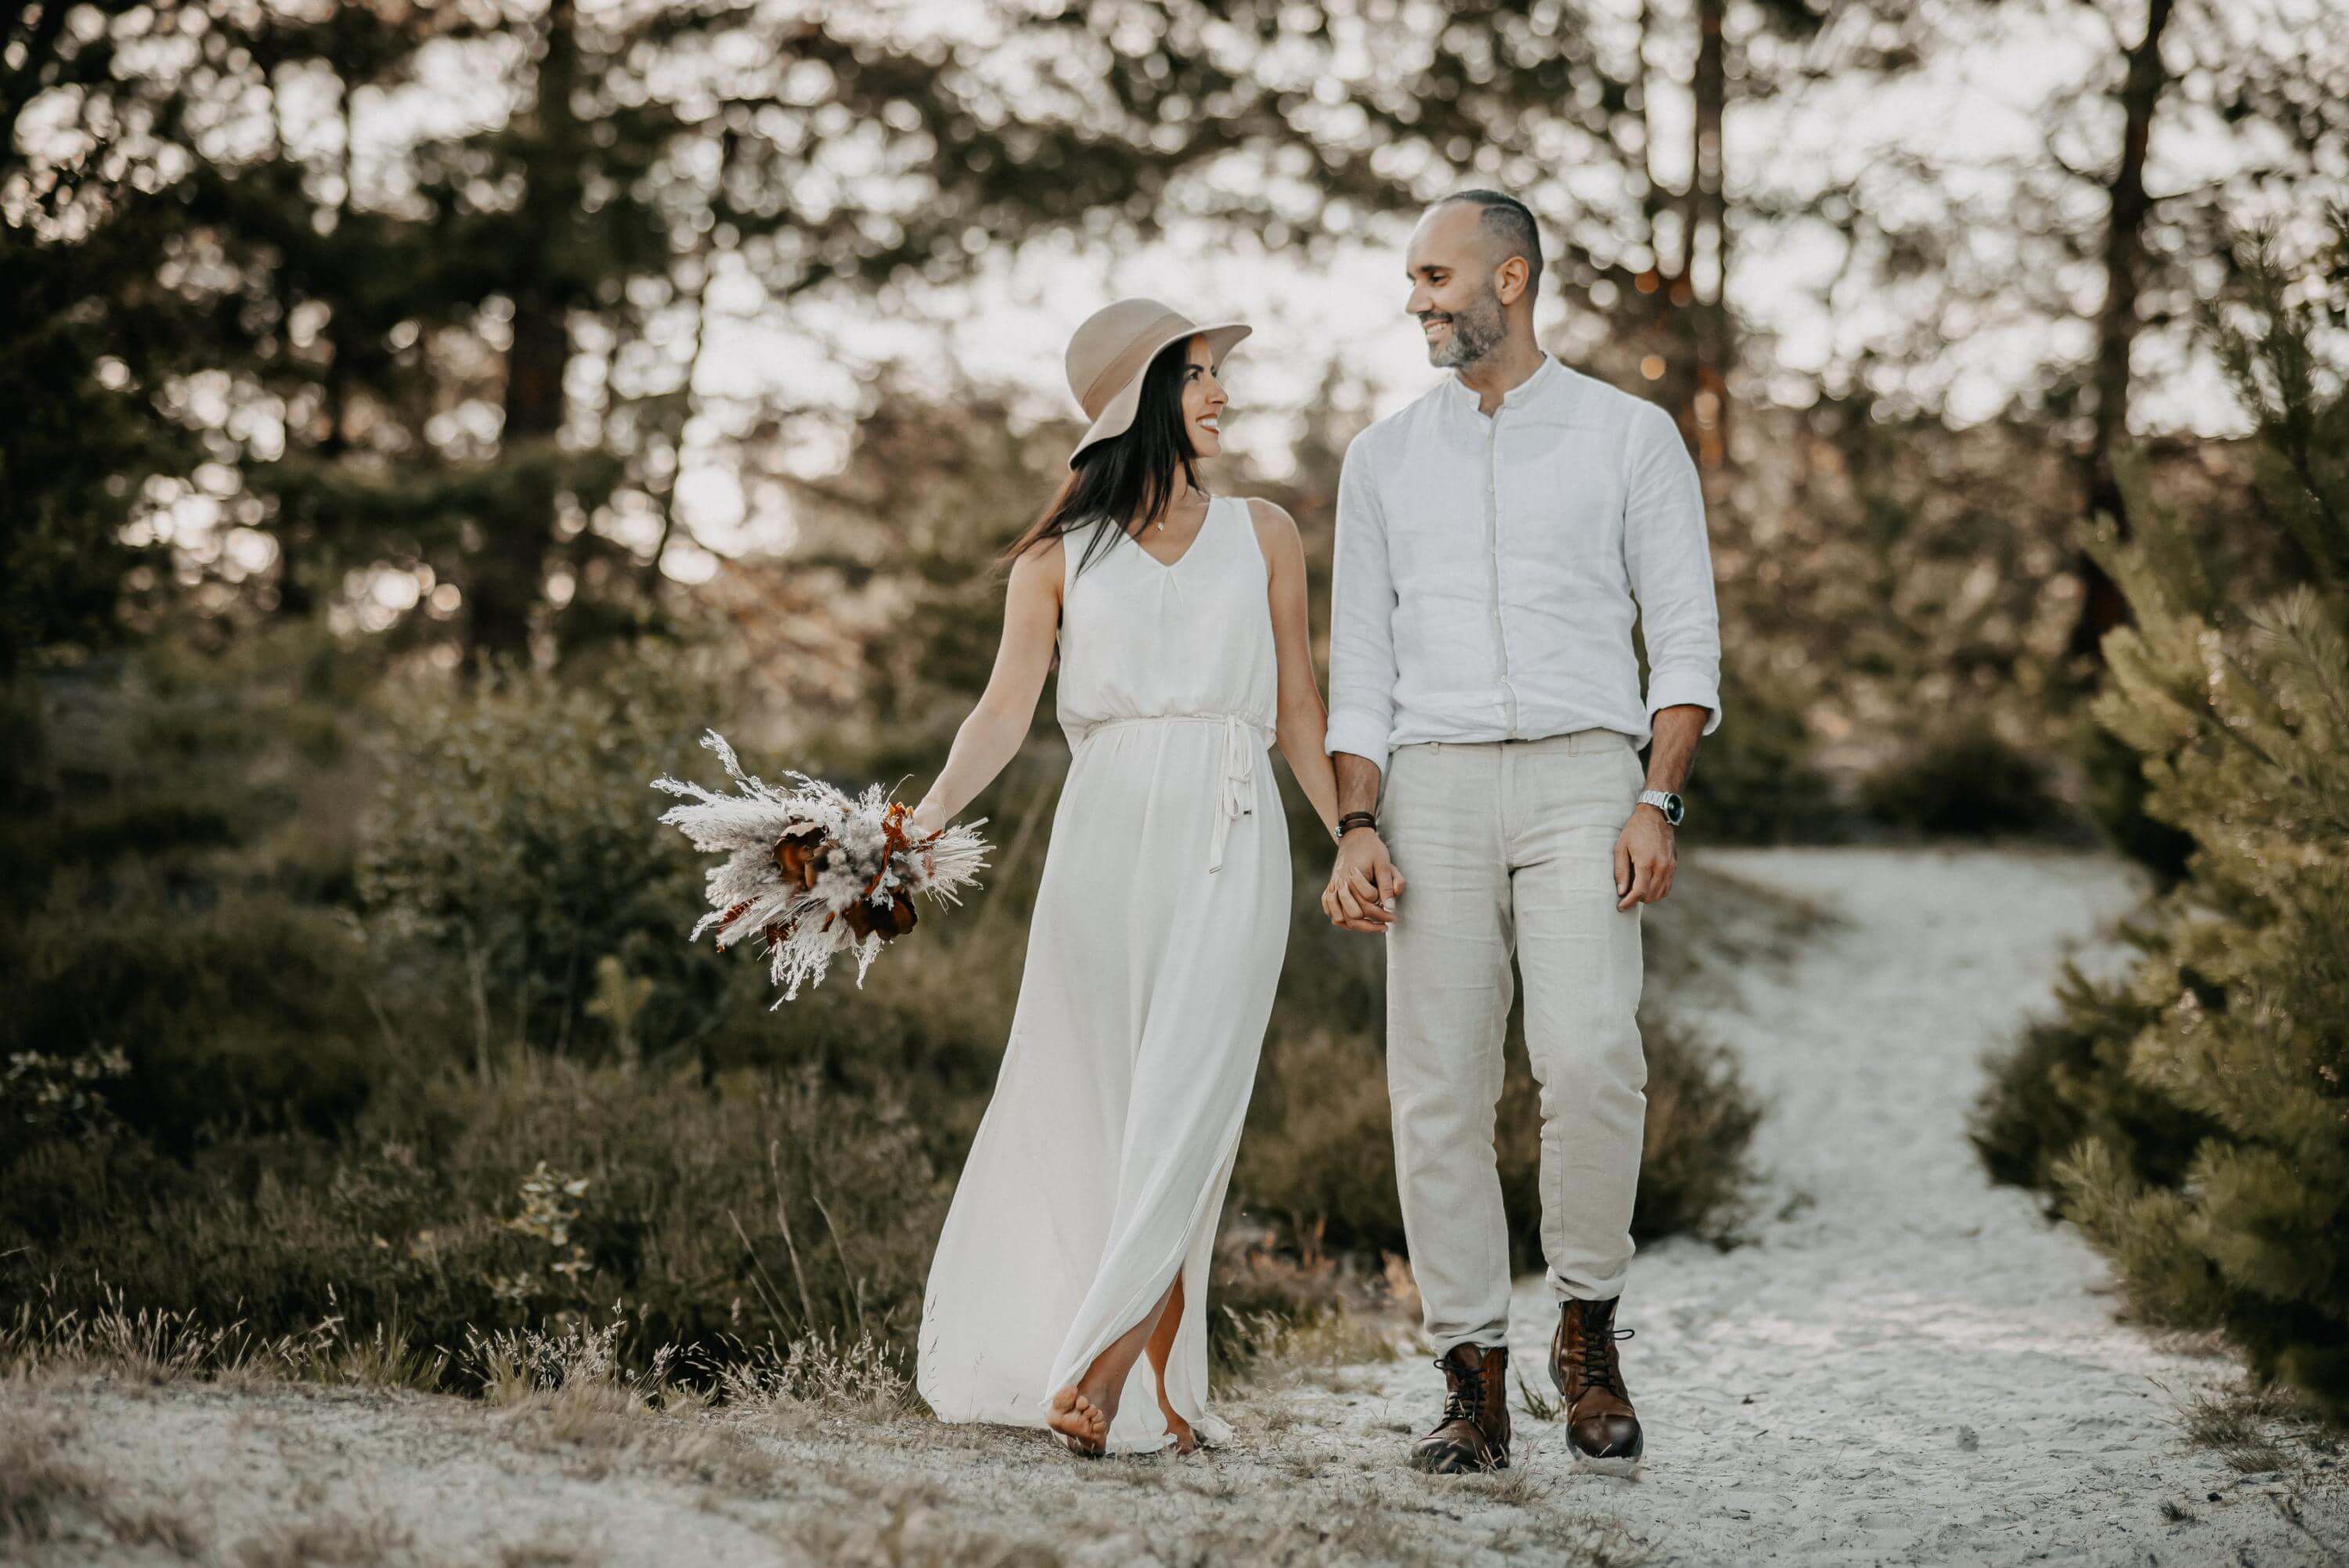 For an engagement photo shoot, a couple of lovers walk holding hands and looking at each other in love through a sandy landscape of paths with a forest. She is still holding a bouquet of dried flowers